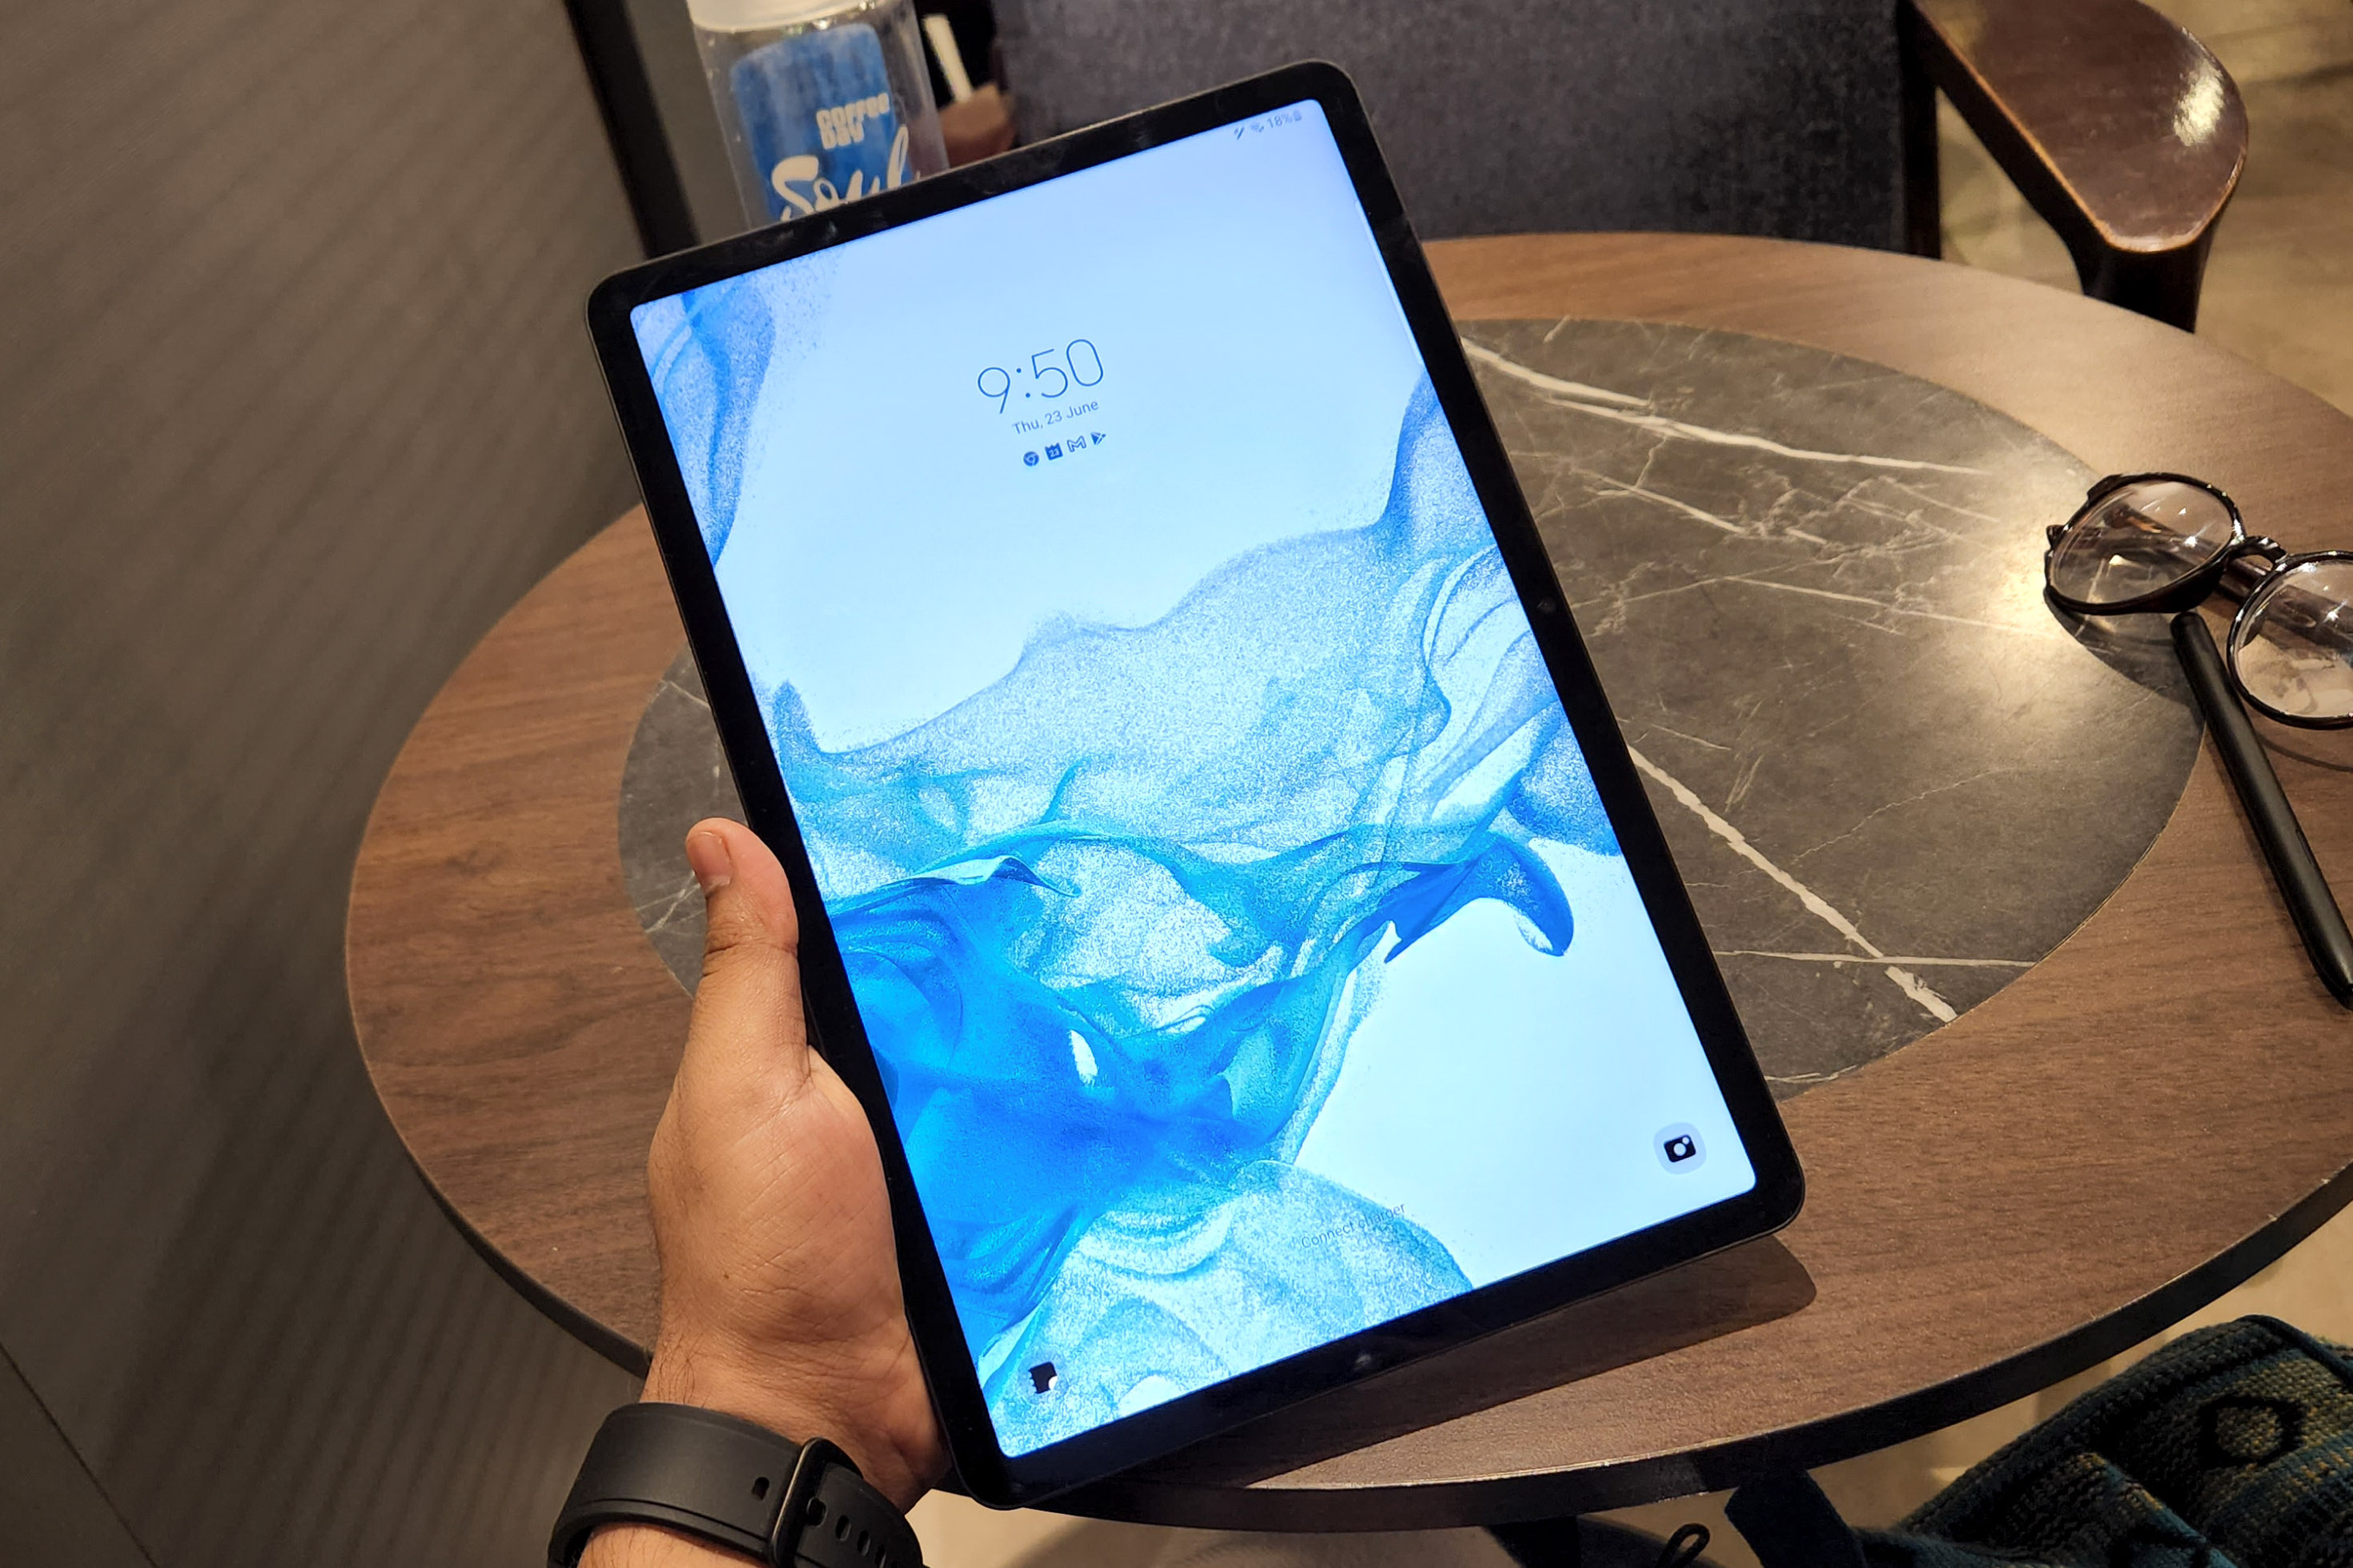 Samsung Galaxy Tab S6 Lite review: Just a really good Android tablet